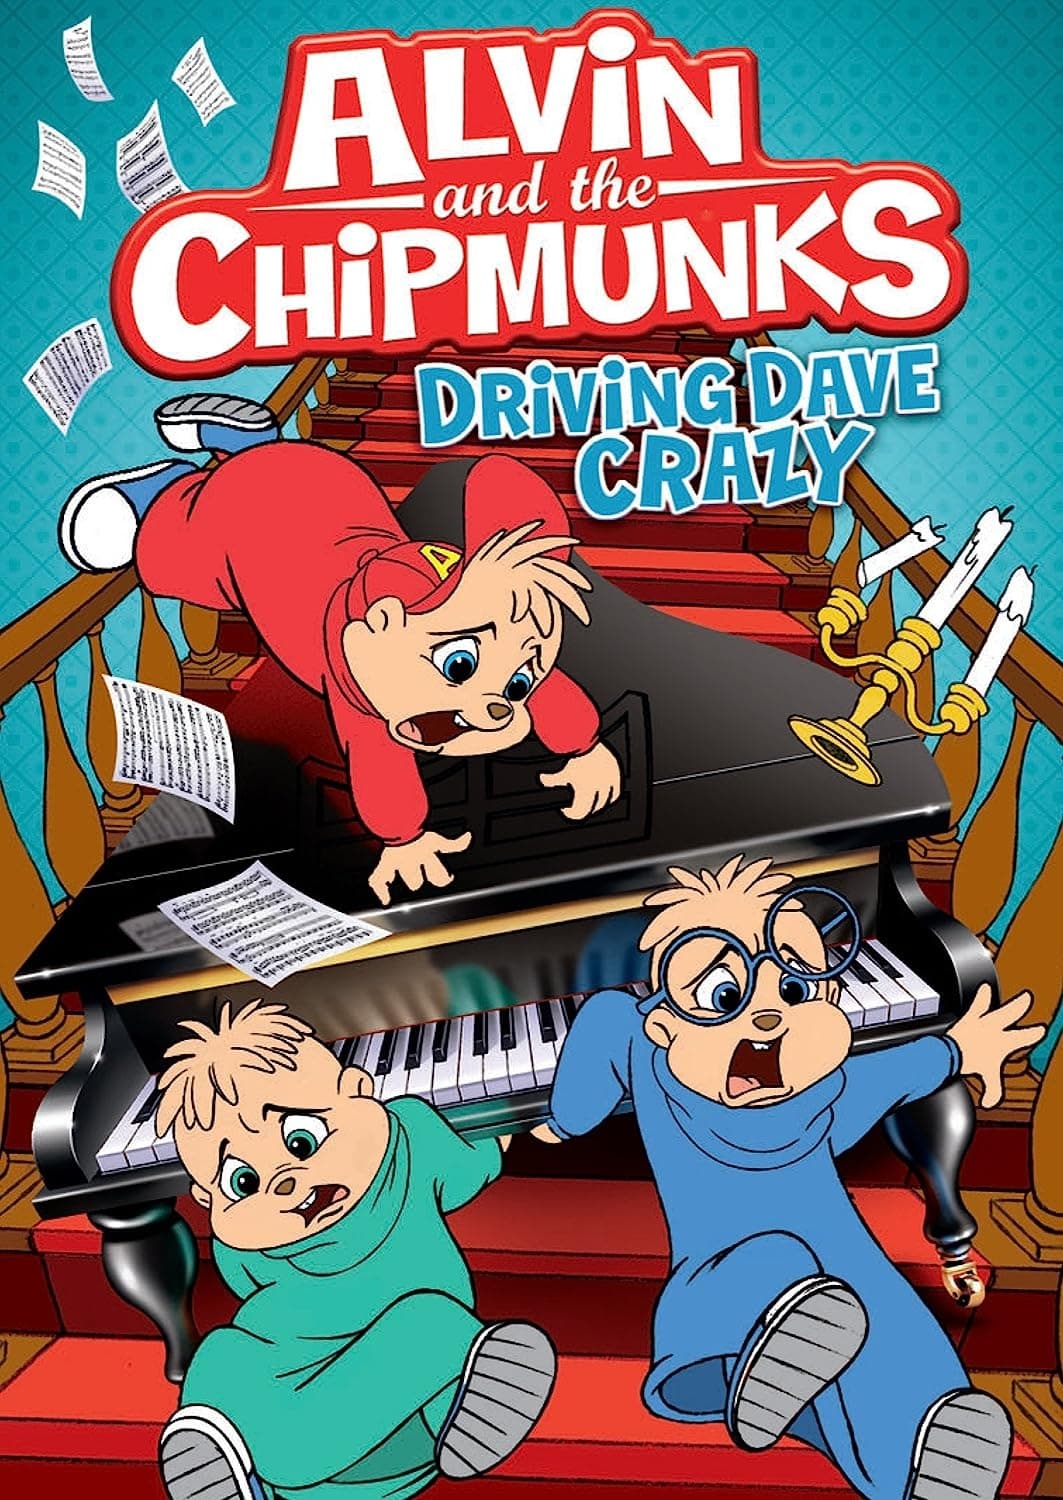 Alvin and The Chipmunks: Driving Dave Crazier